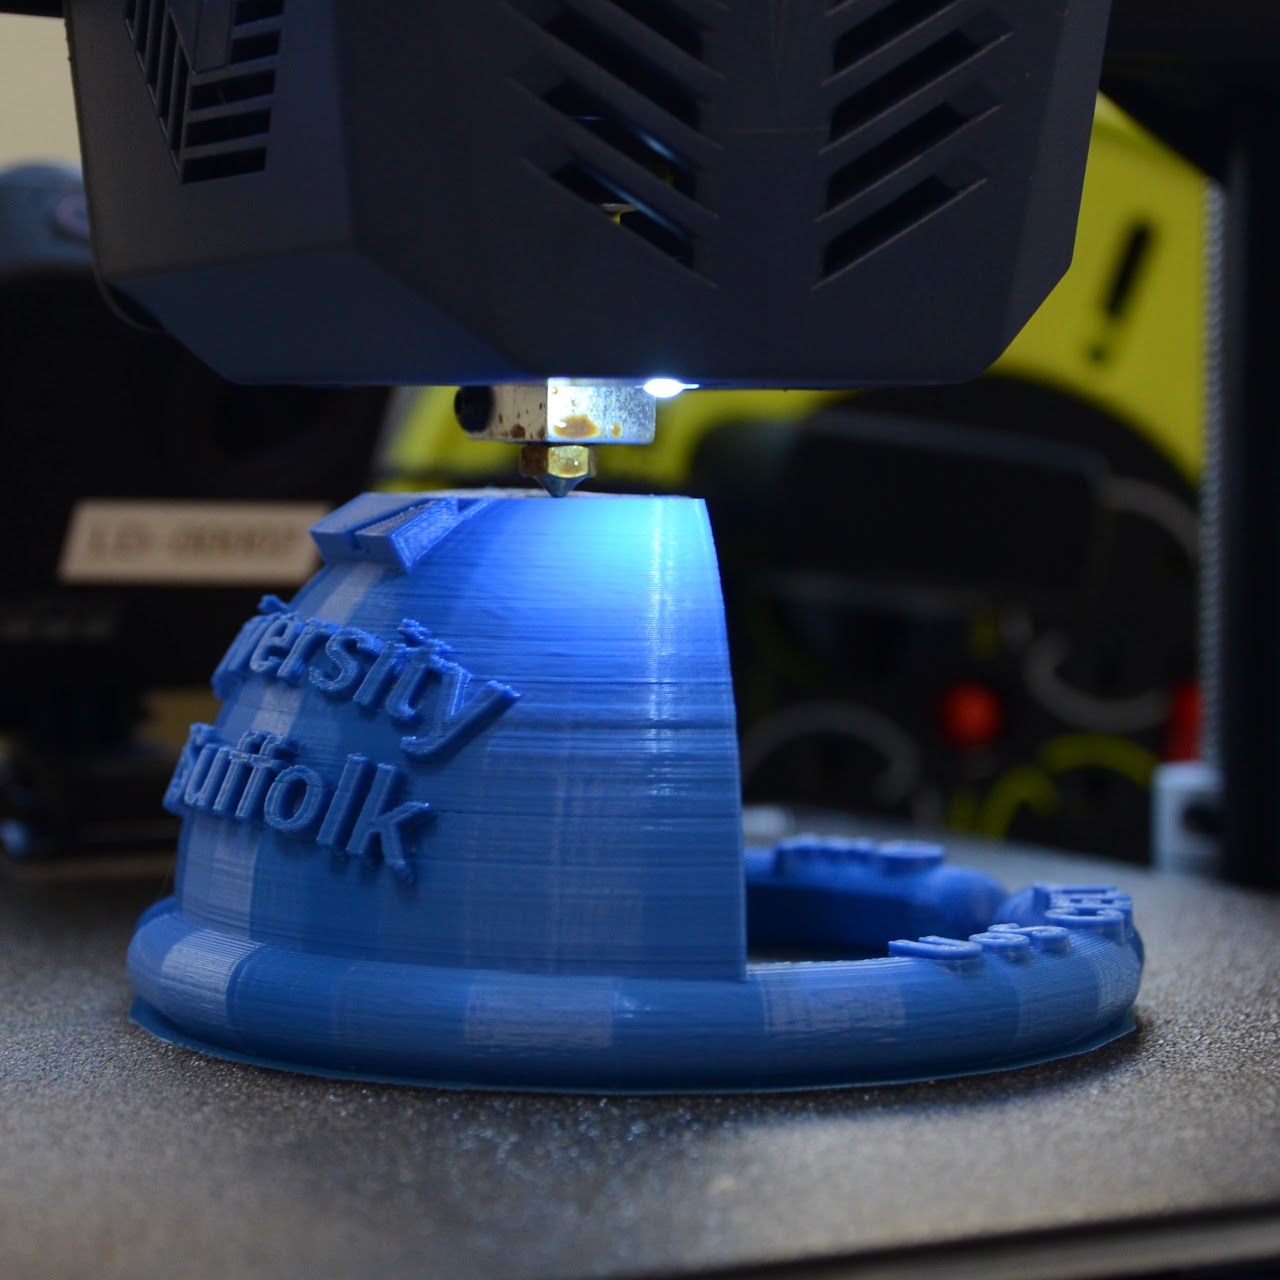 3D Printing in Legal Education